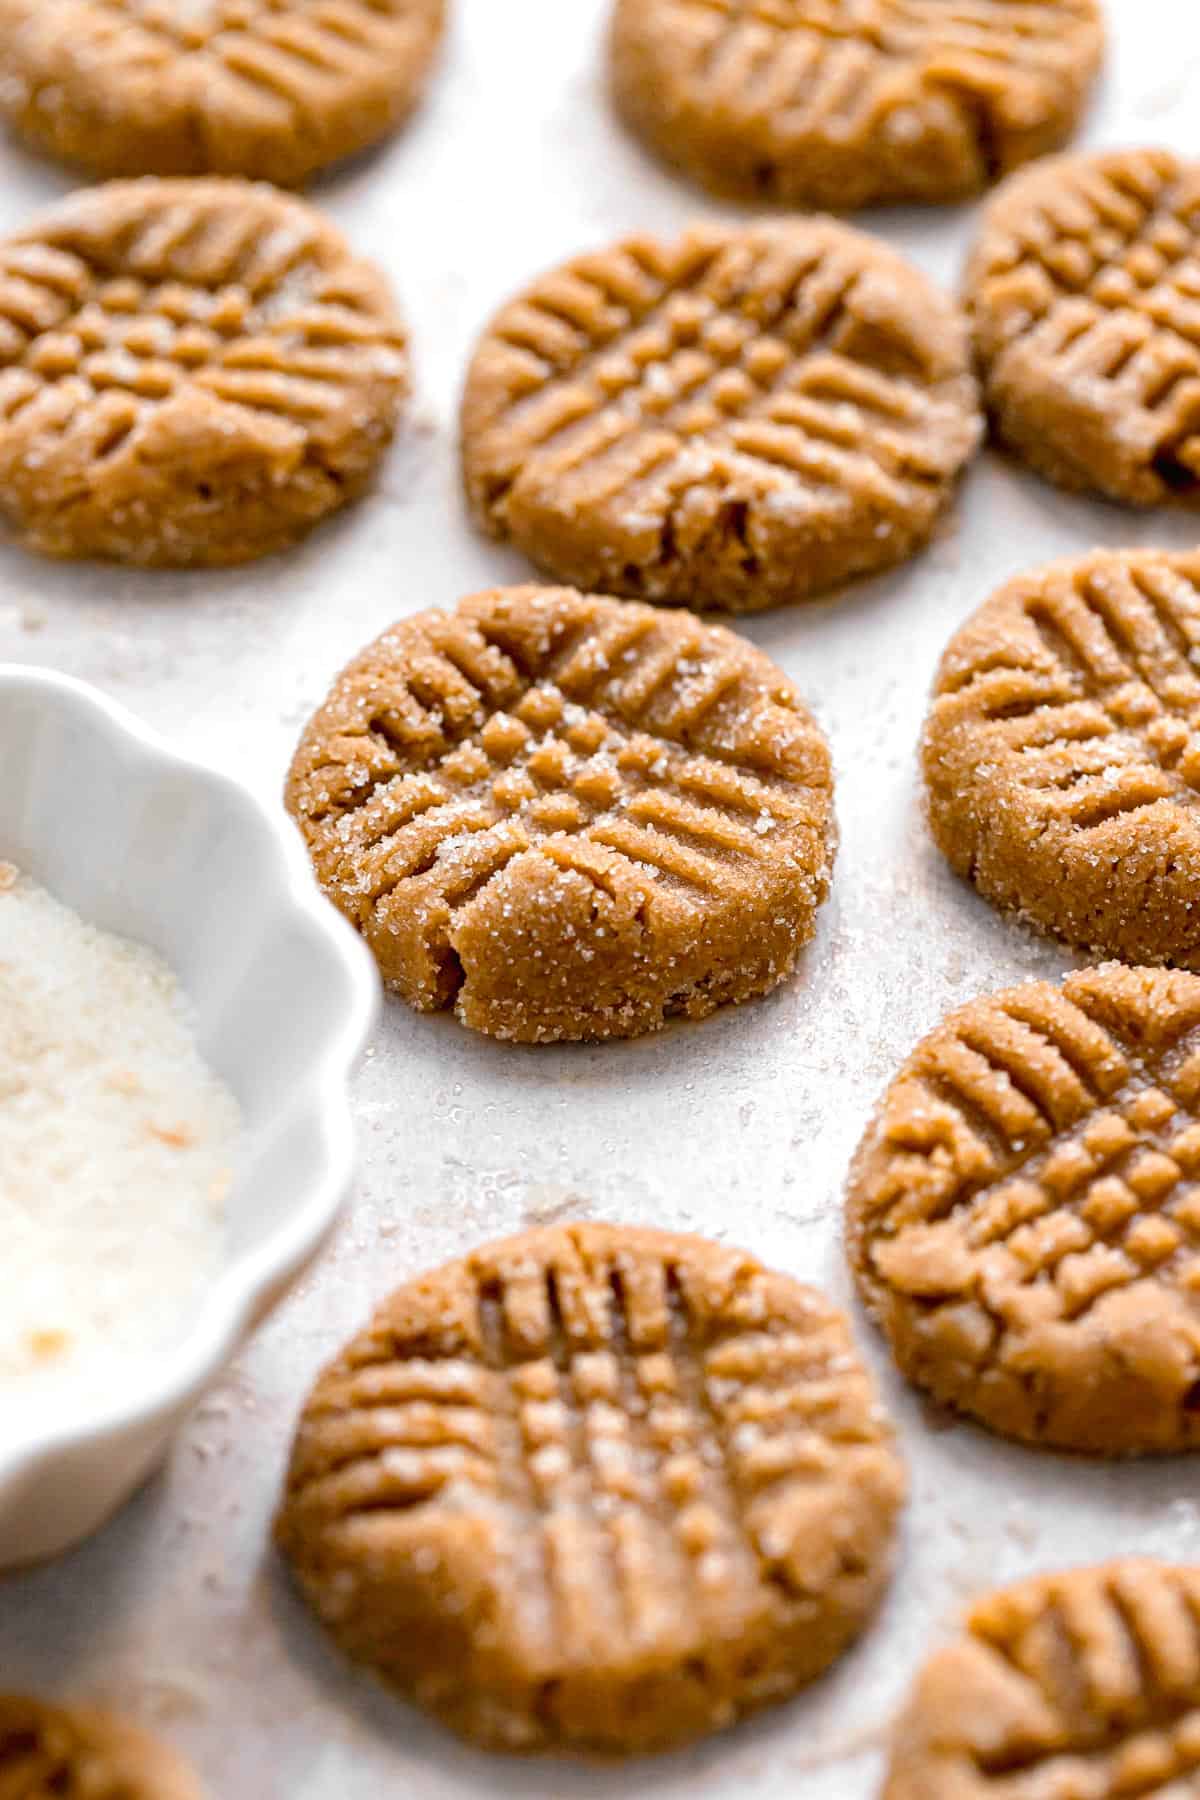 peanut butter cookie dough rolled in sugar with criss-cross fork indentations.